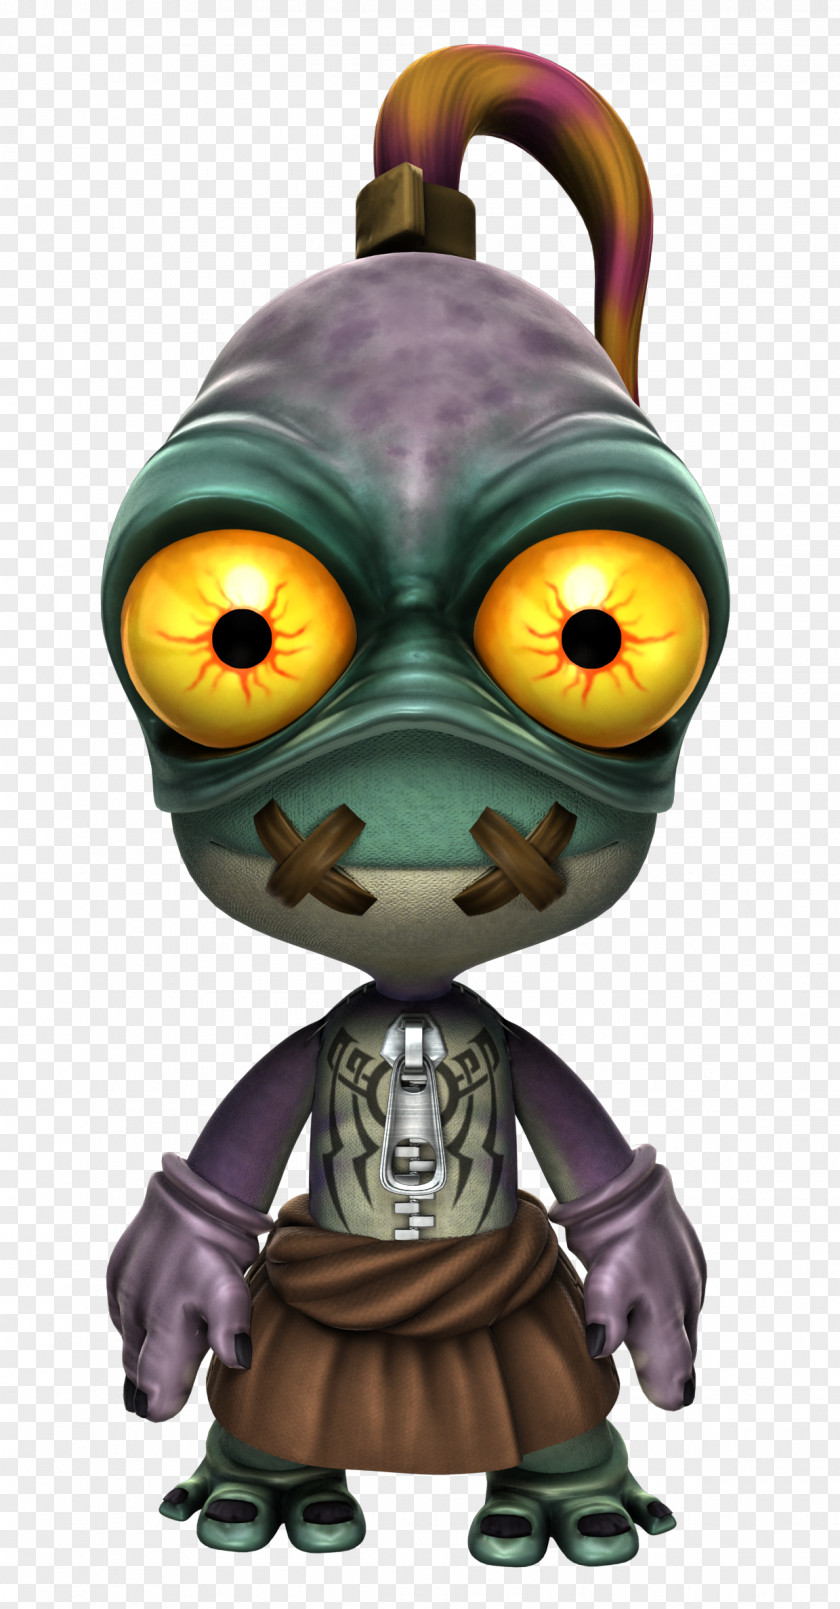 Toy Story LittleBigPlanet 2 Karting Sephiroth 3 PNG